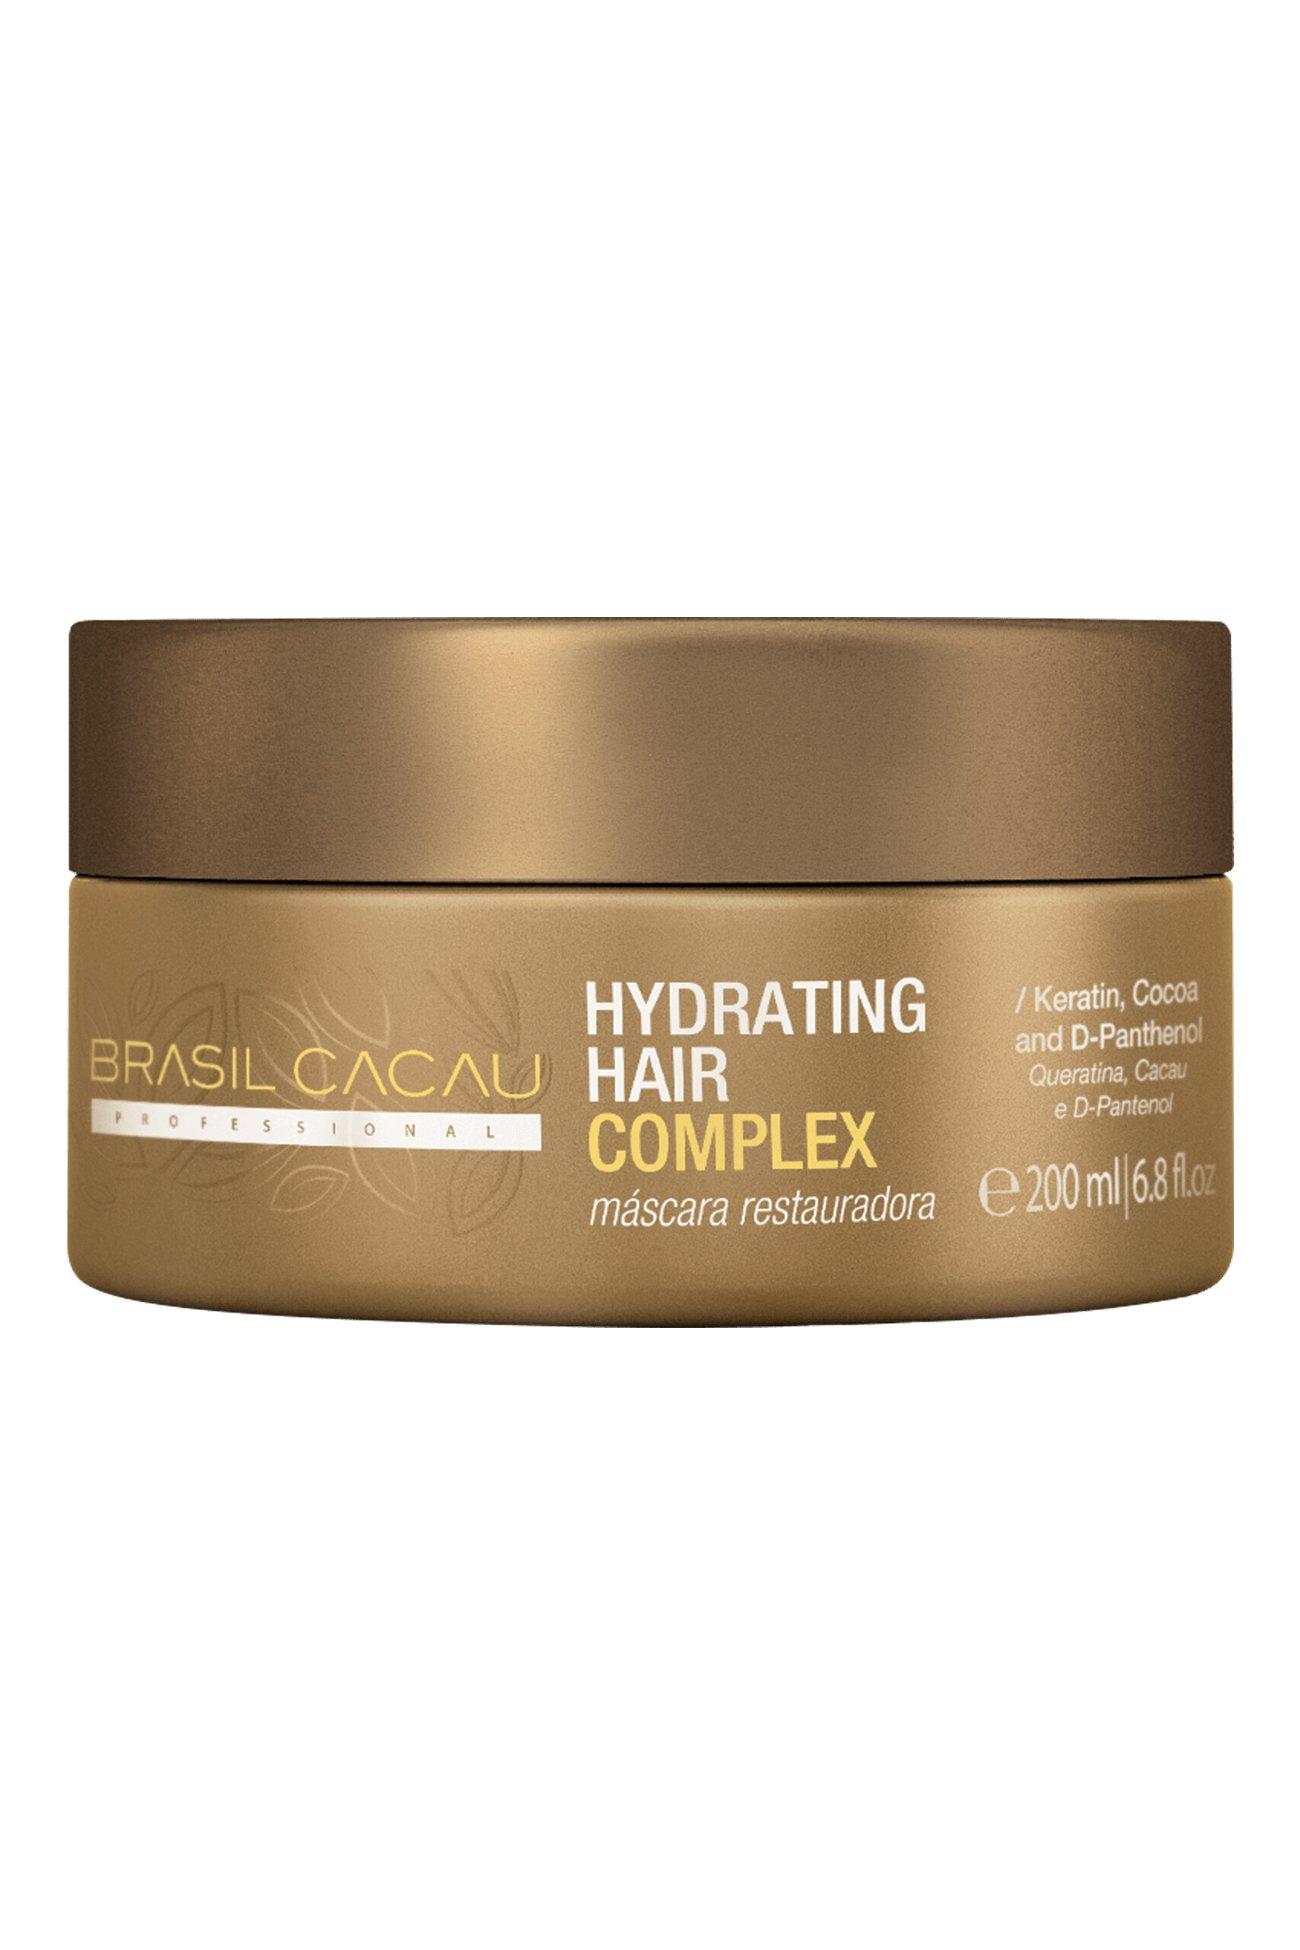 Hydrating Hair Complex, Mask 200g